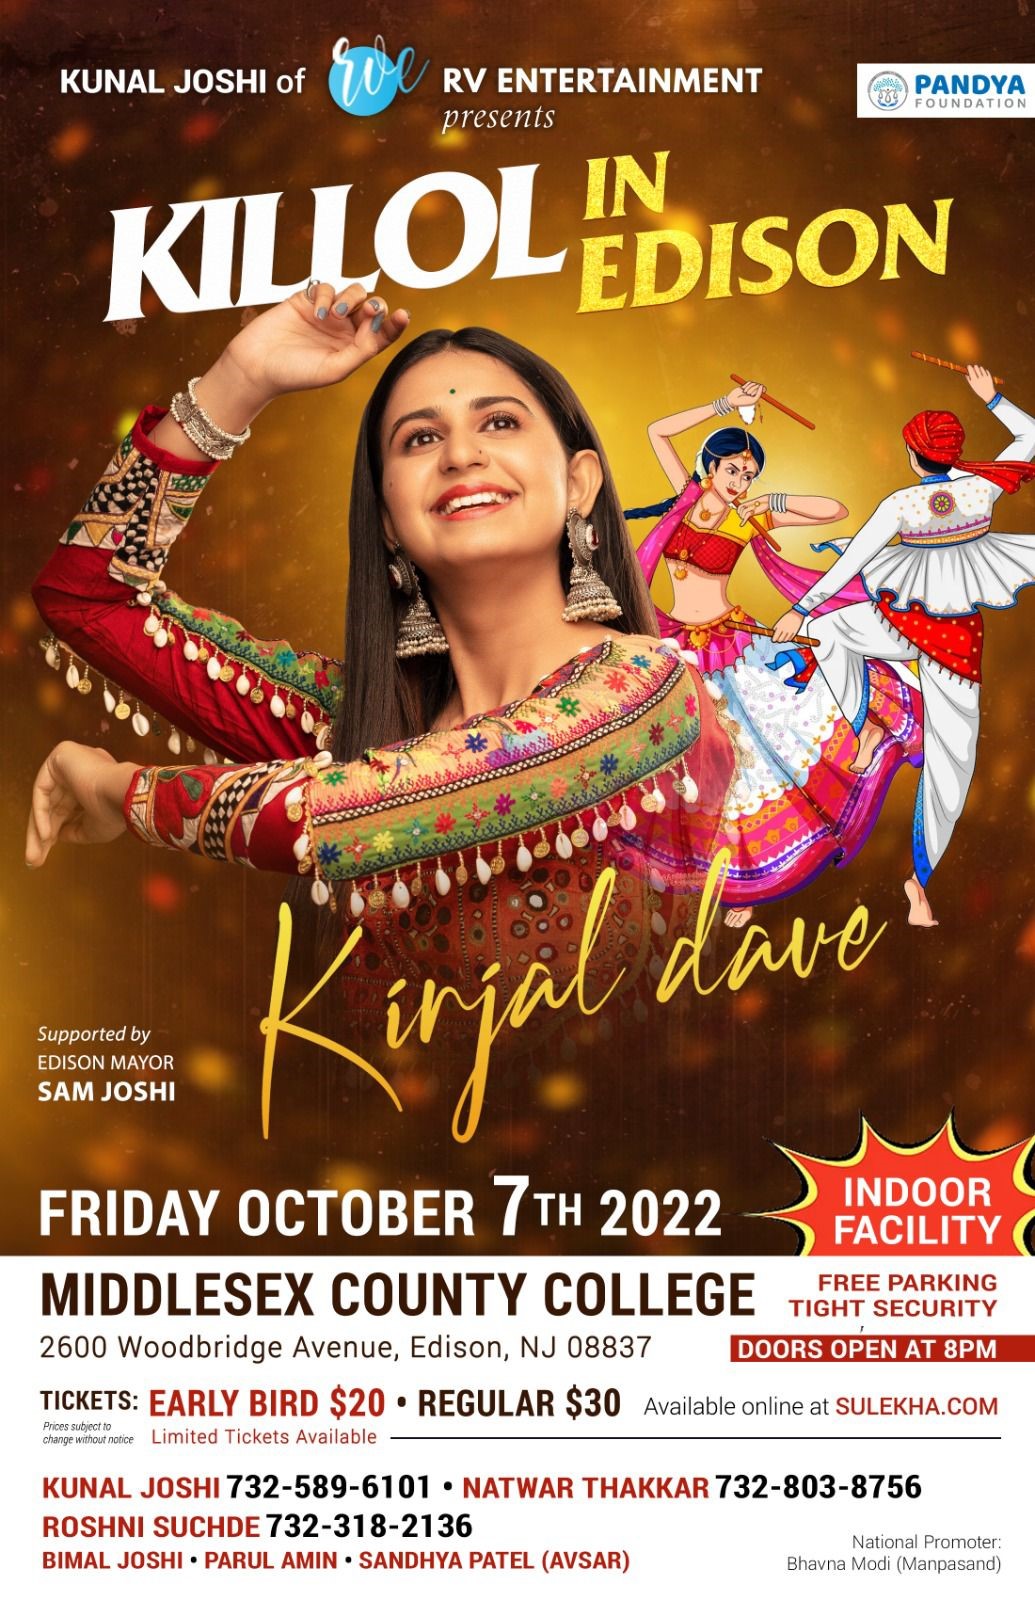 Garba with Kinjal dave at Middlesex County College Friday October 7th, 2022 Killo in Edison with Kinjal Dave on oct. 07, 20:00@Middlesex county college Edison NJ - Buy tickets and Get information on Desi Events desievents.org